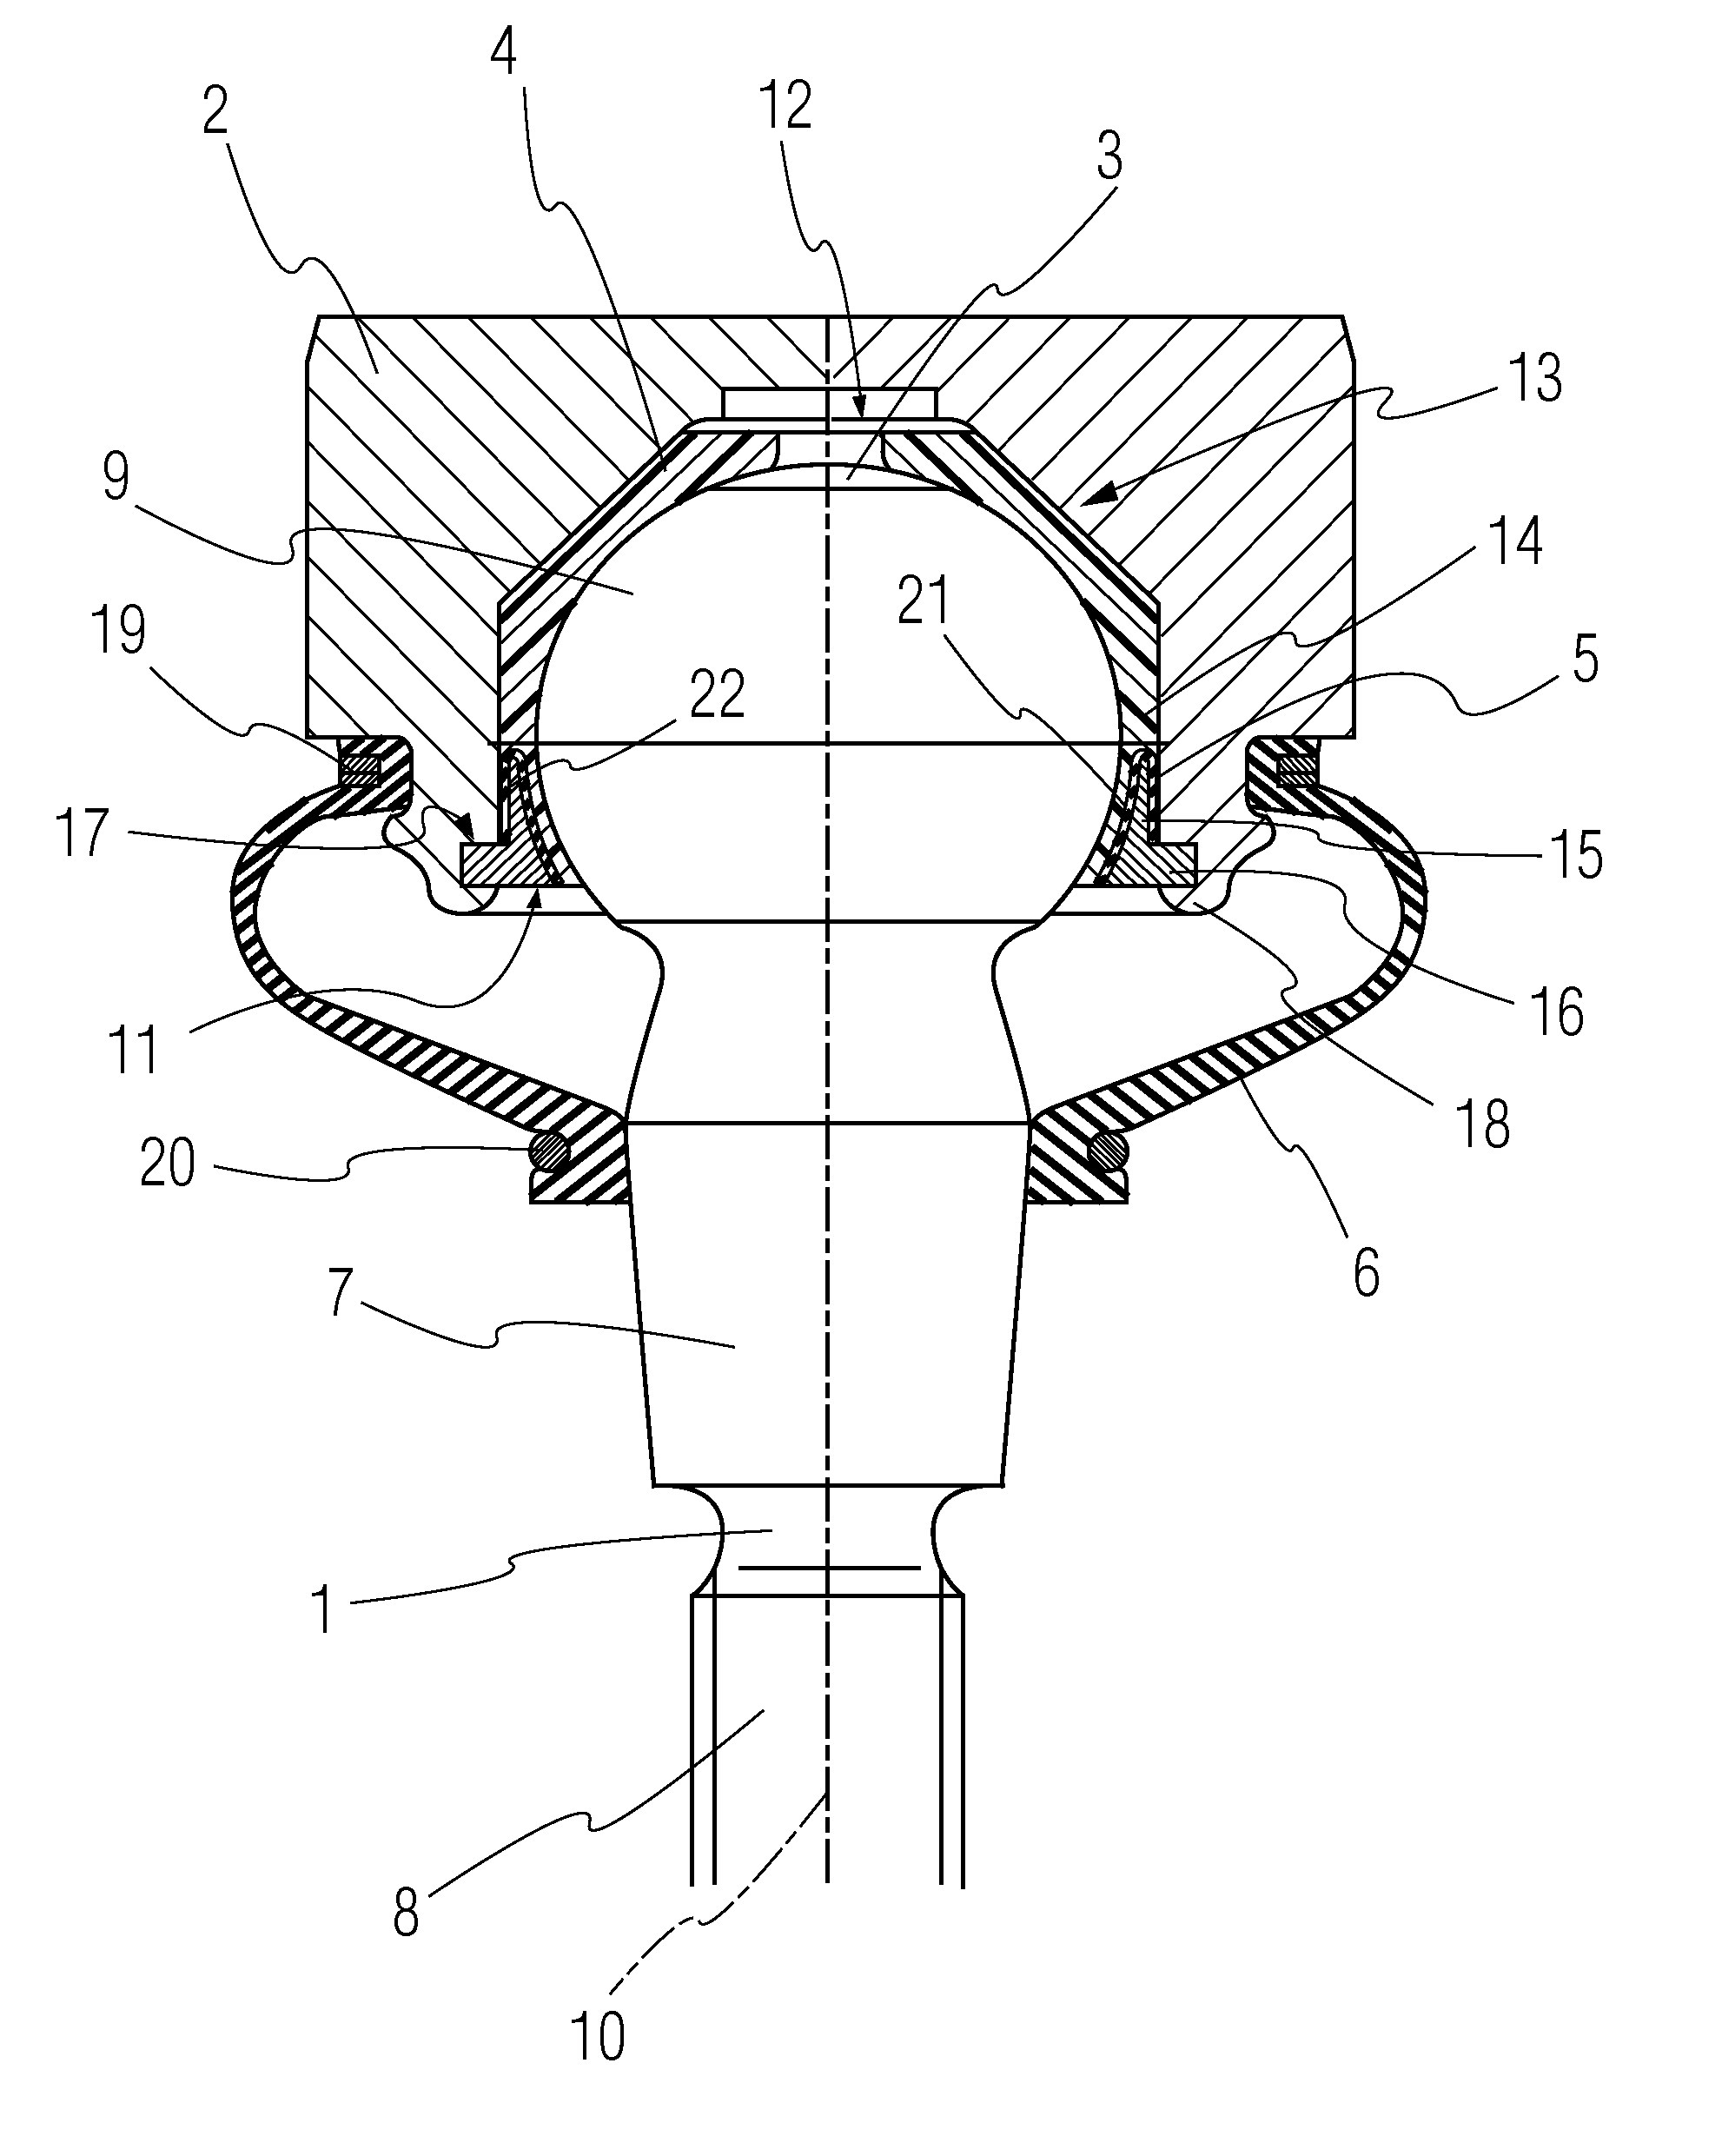 Ball-and-socket joint